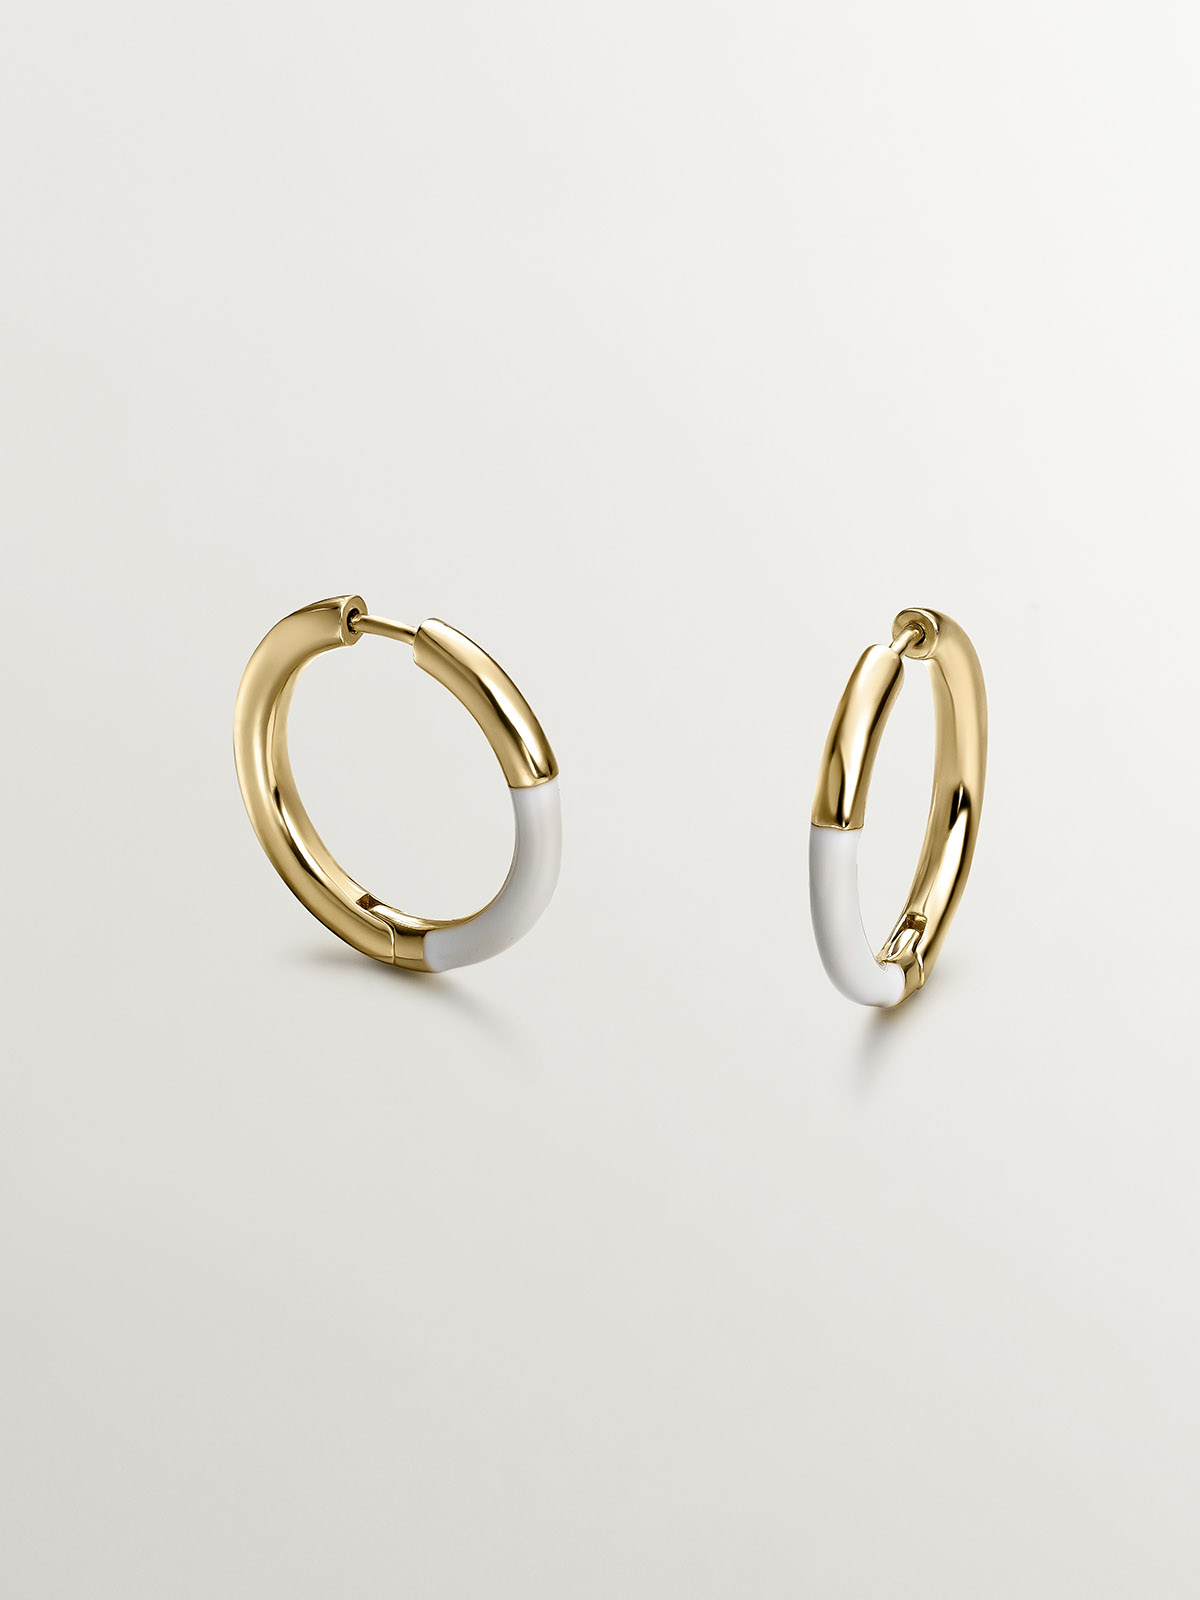 Medium hoop earrings made of 925 silver bathed in 18K yellow gold with white enamel